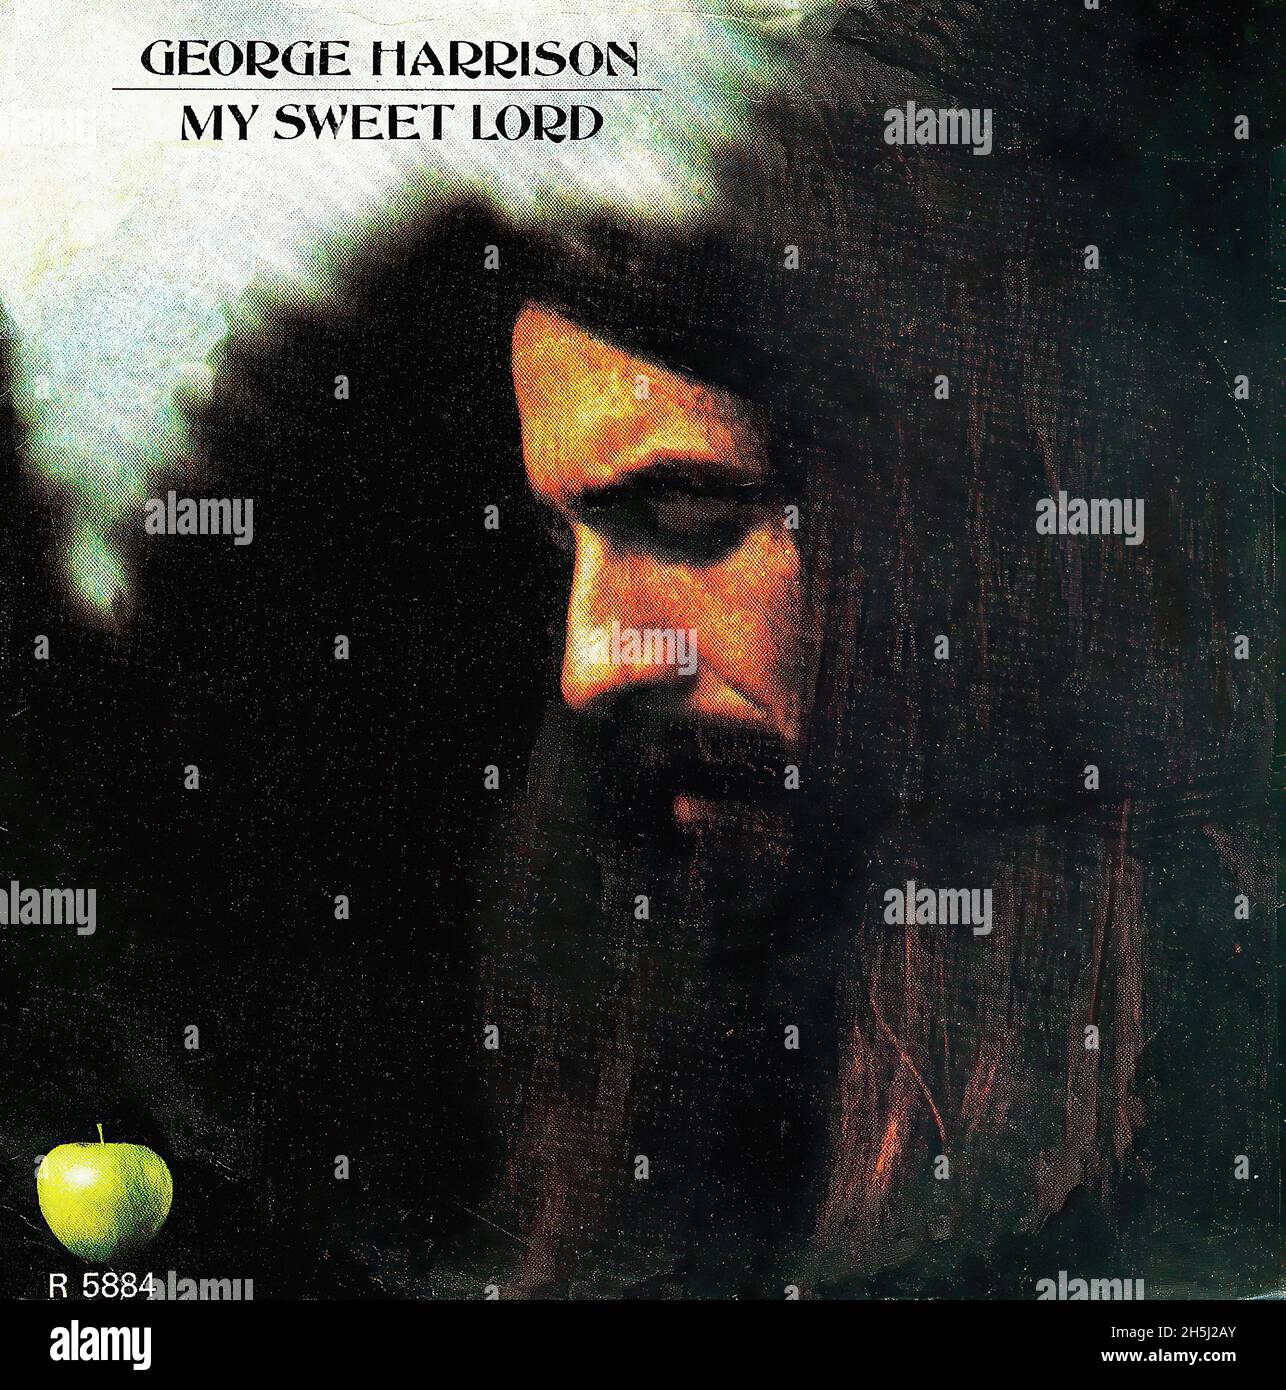 Vintage single record cover - Harrison, George - My Sweet Lord - UK - 1970 Stock Photo